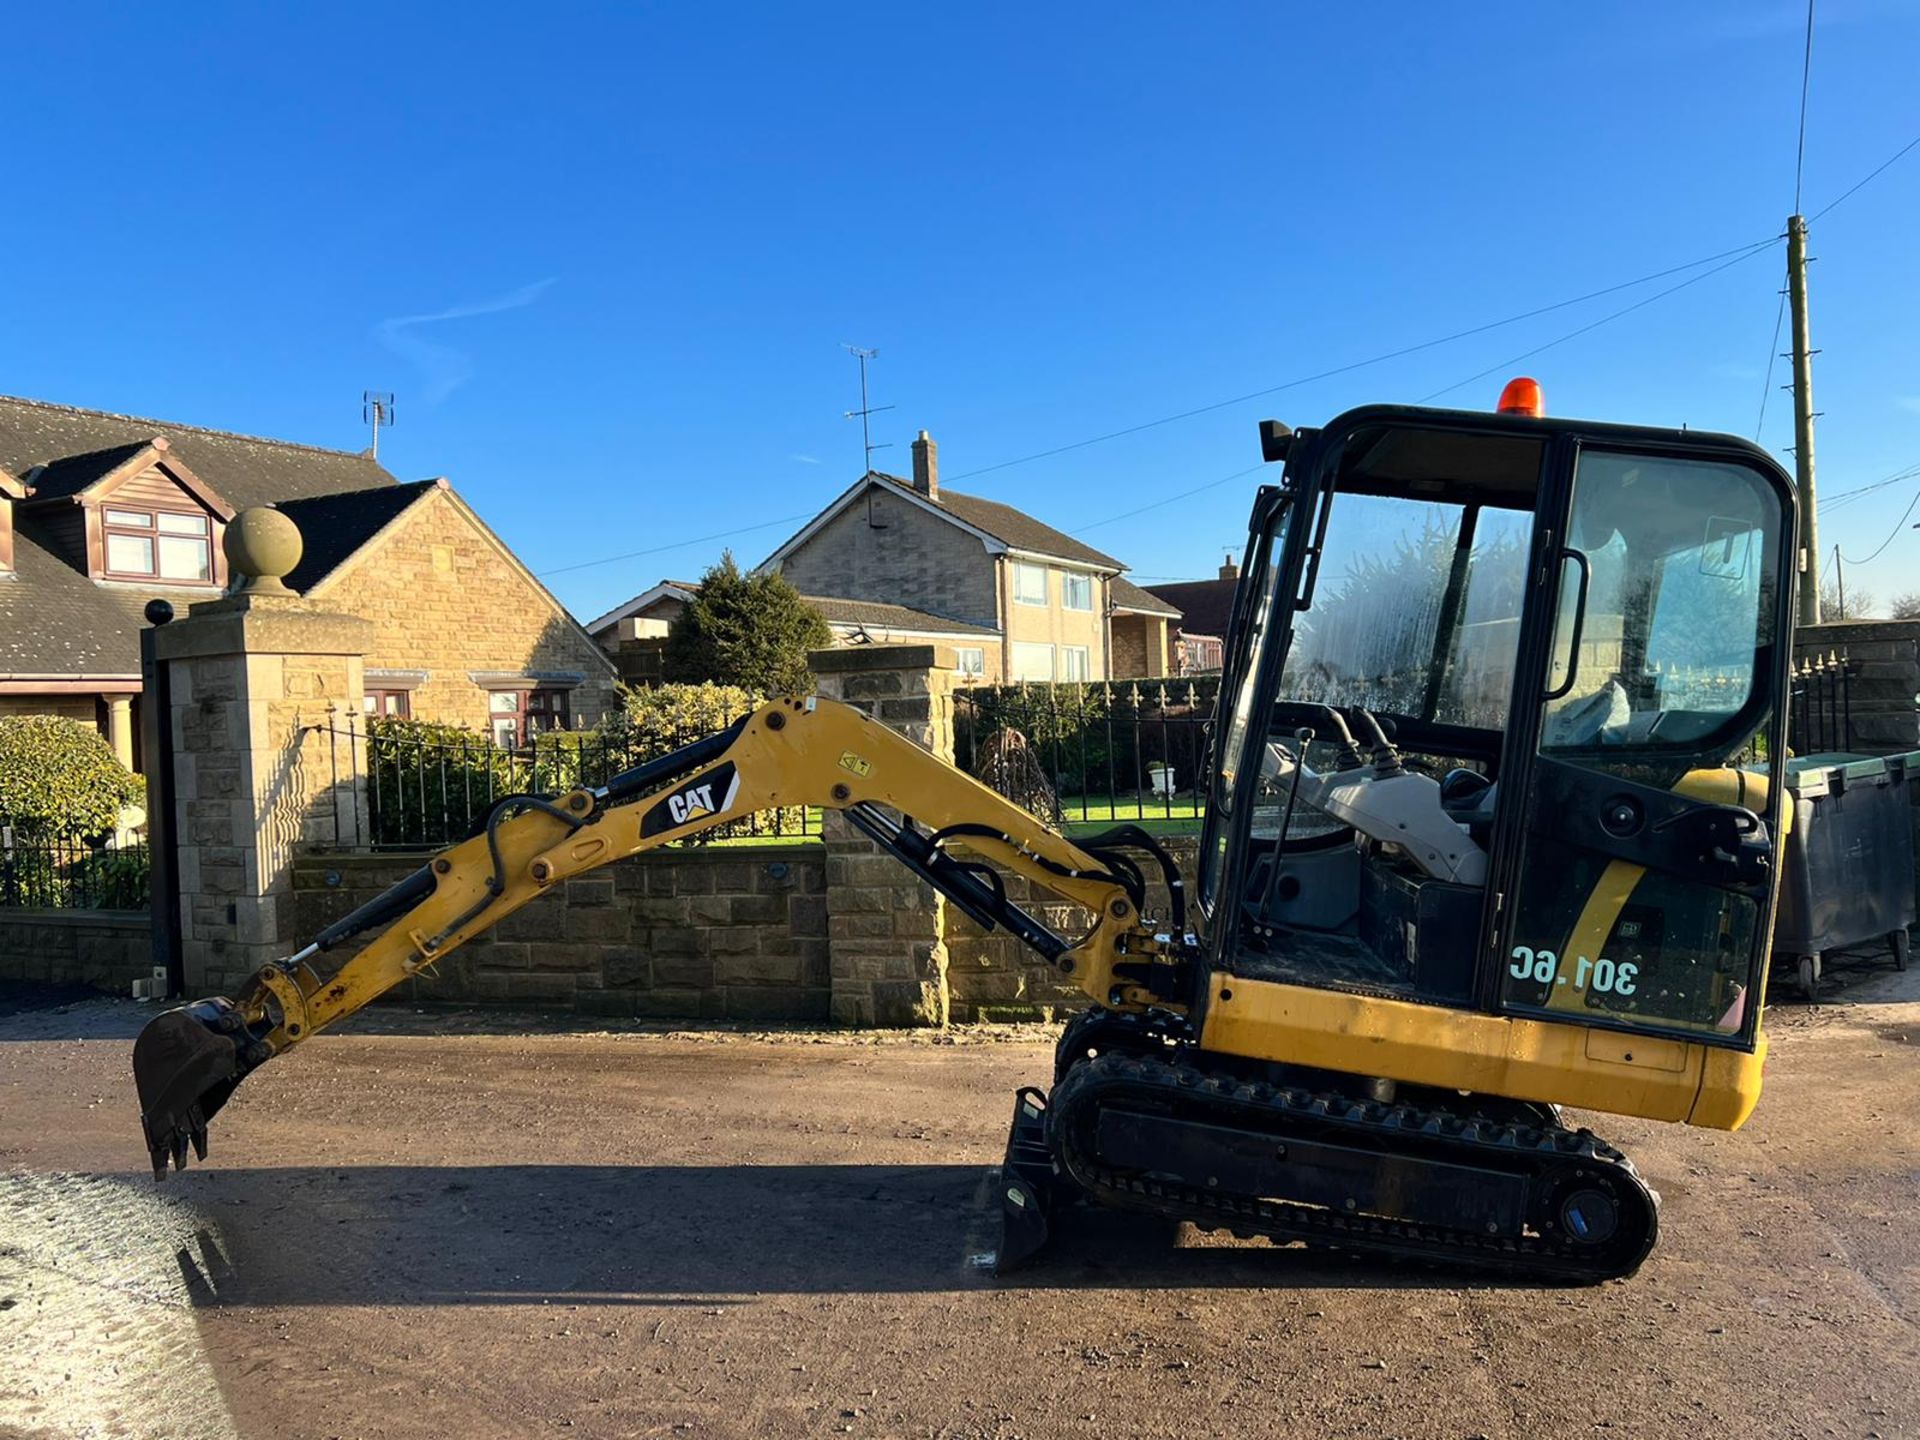 CATERPILLAR 301.6C 1.6 TON MINI DIGGER, RUNS DRIVES AND DIGS, 3 CYLINDER DIESEL ENGINE, YEAR 2007 - Image 2 of 18